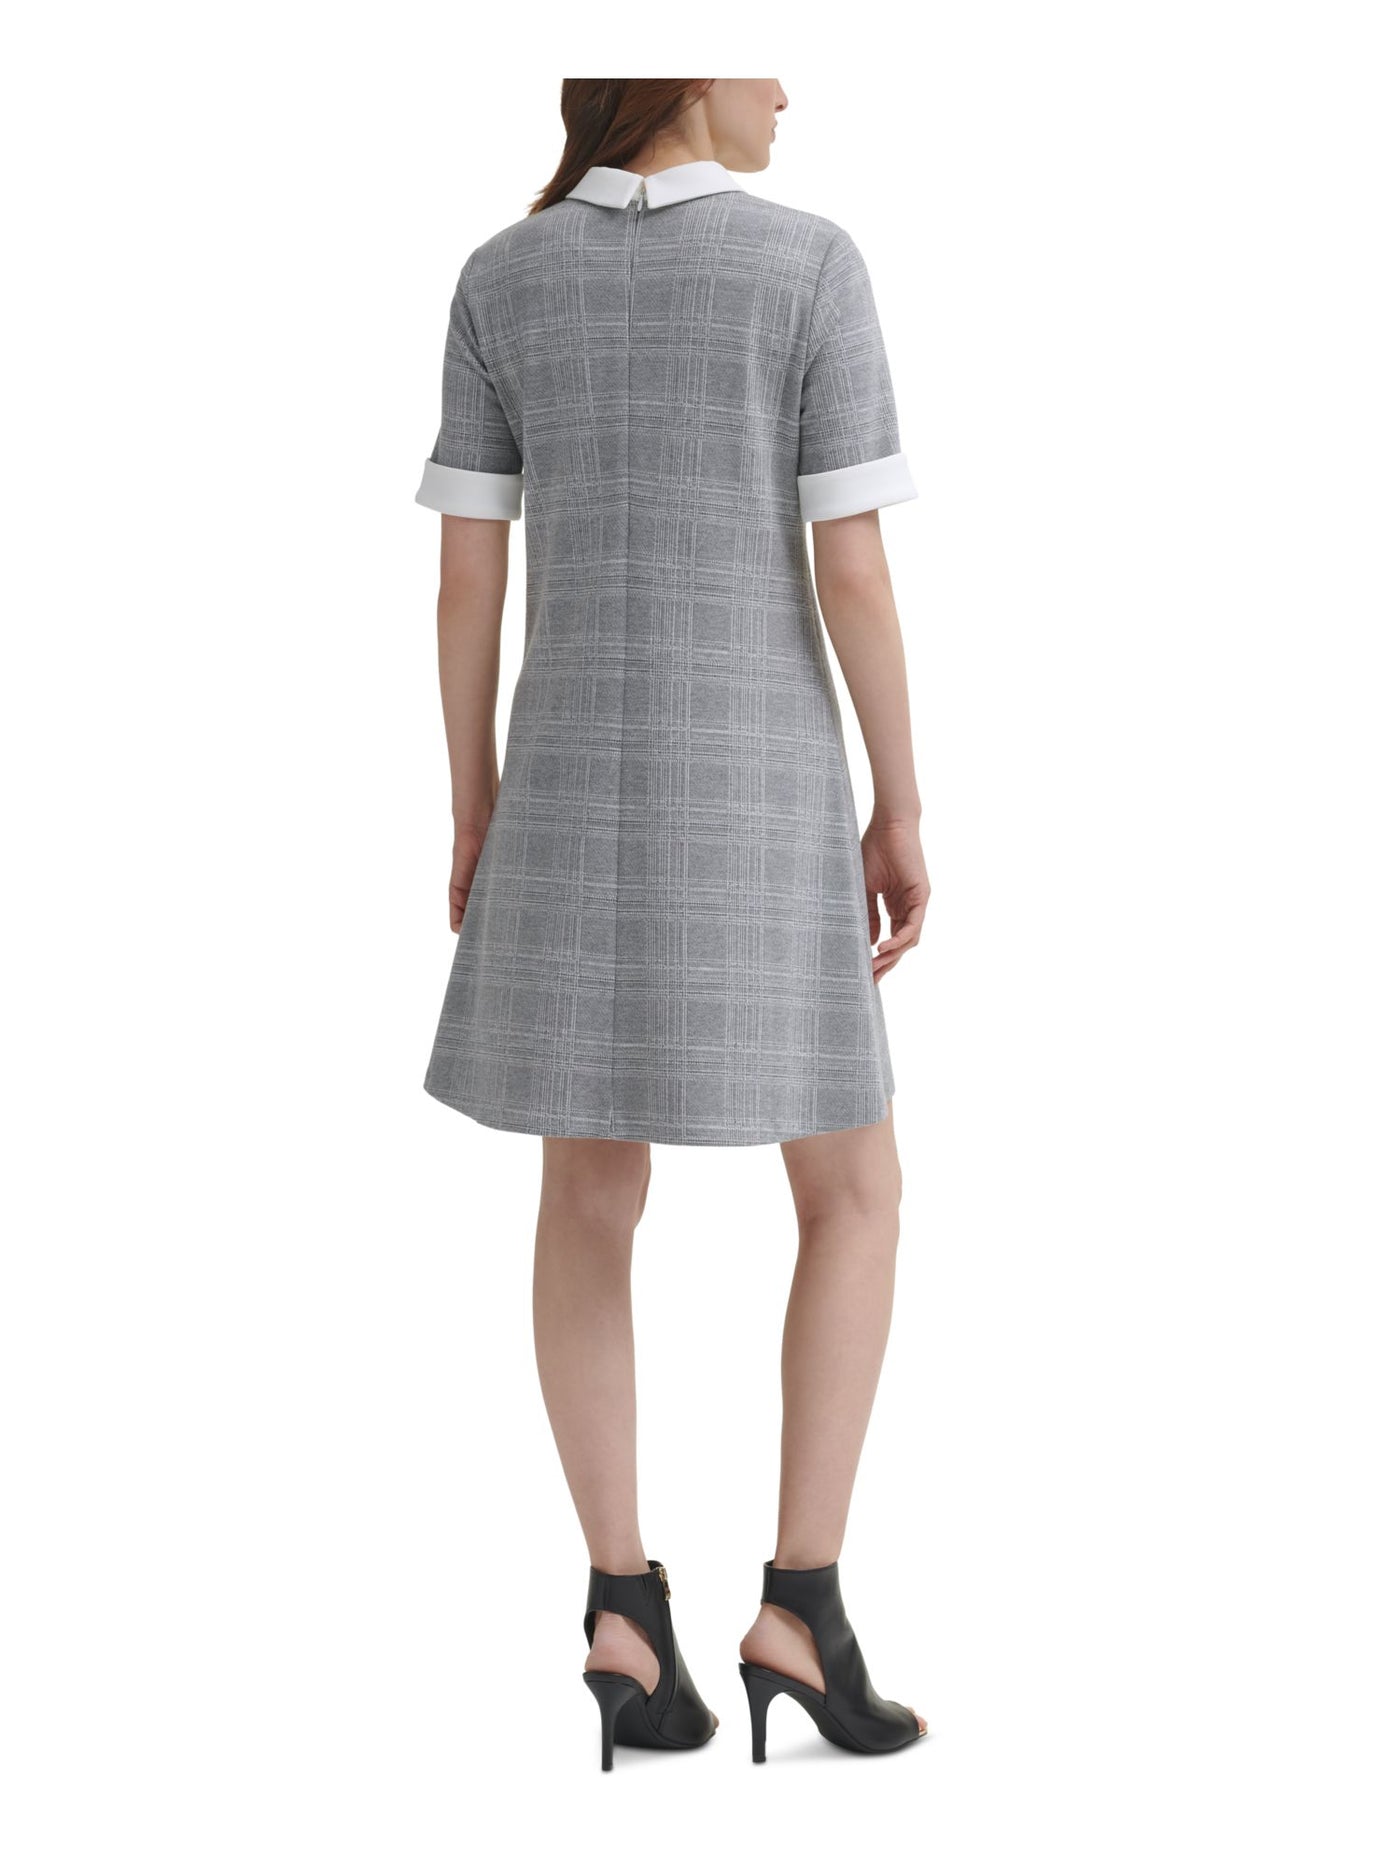 DKNY Womens Gray Stretch Zippered Plaid Short Sleeve Point Collar Above The Knee Wear To Work Shirt Dress 14